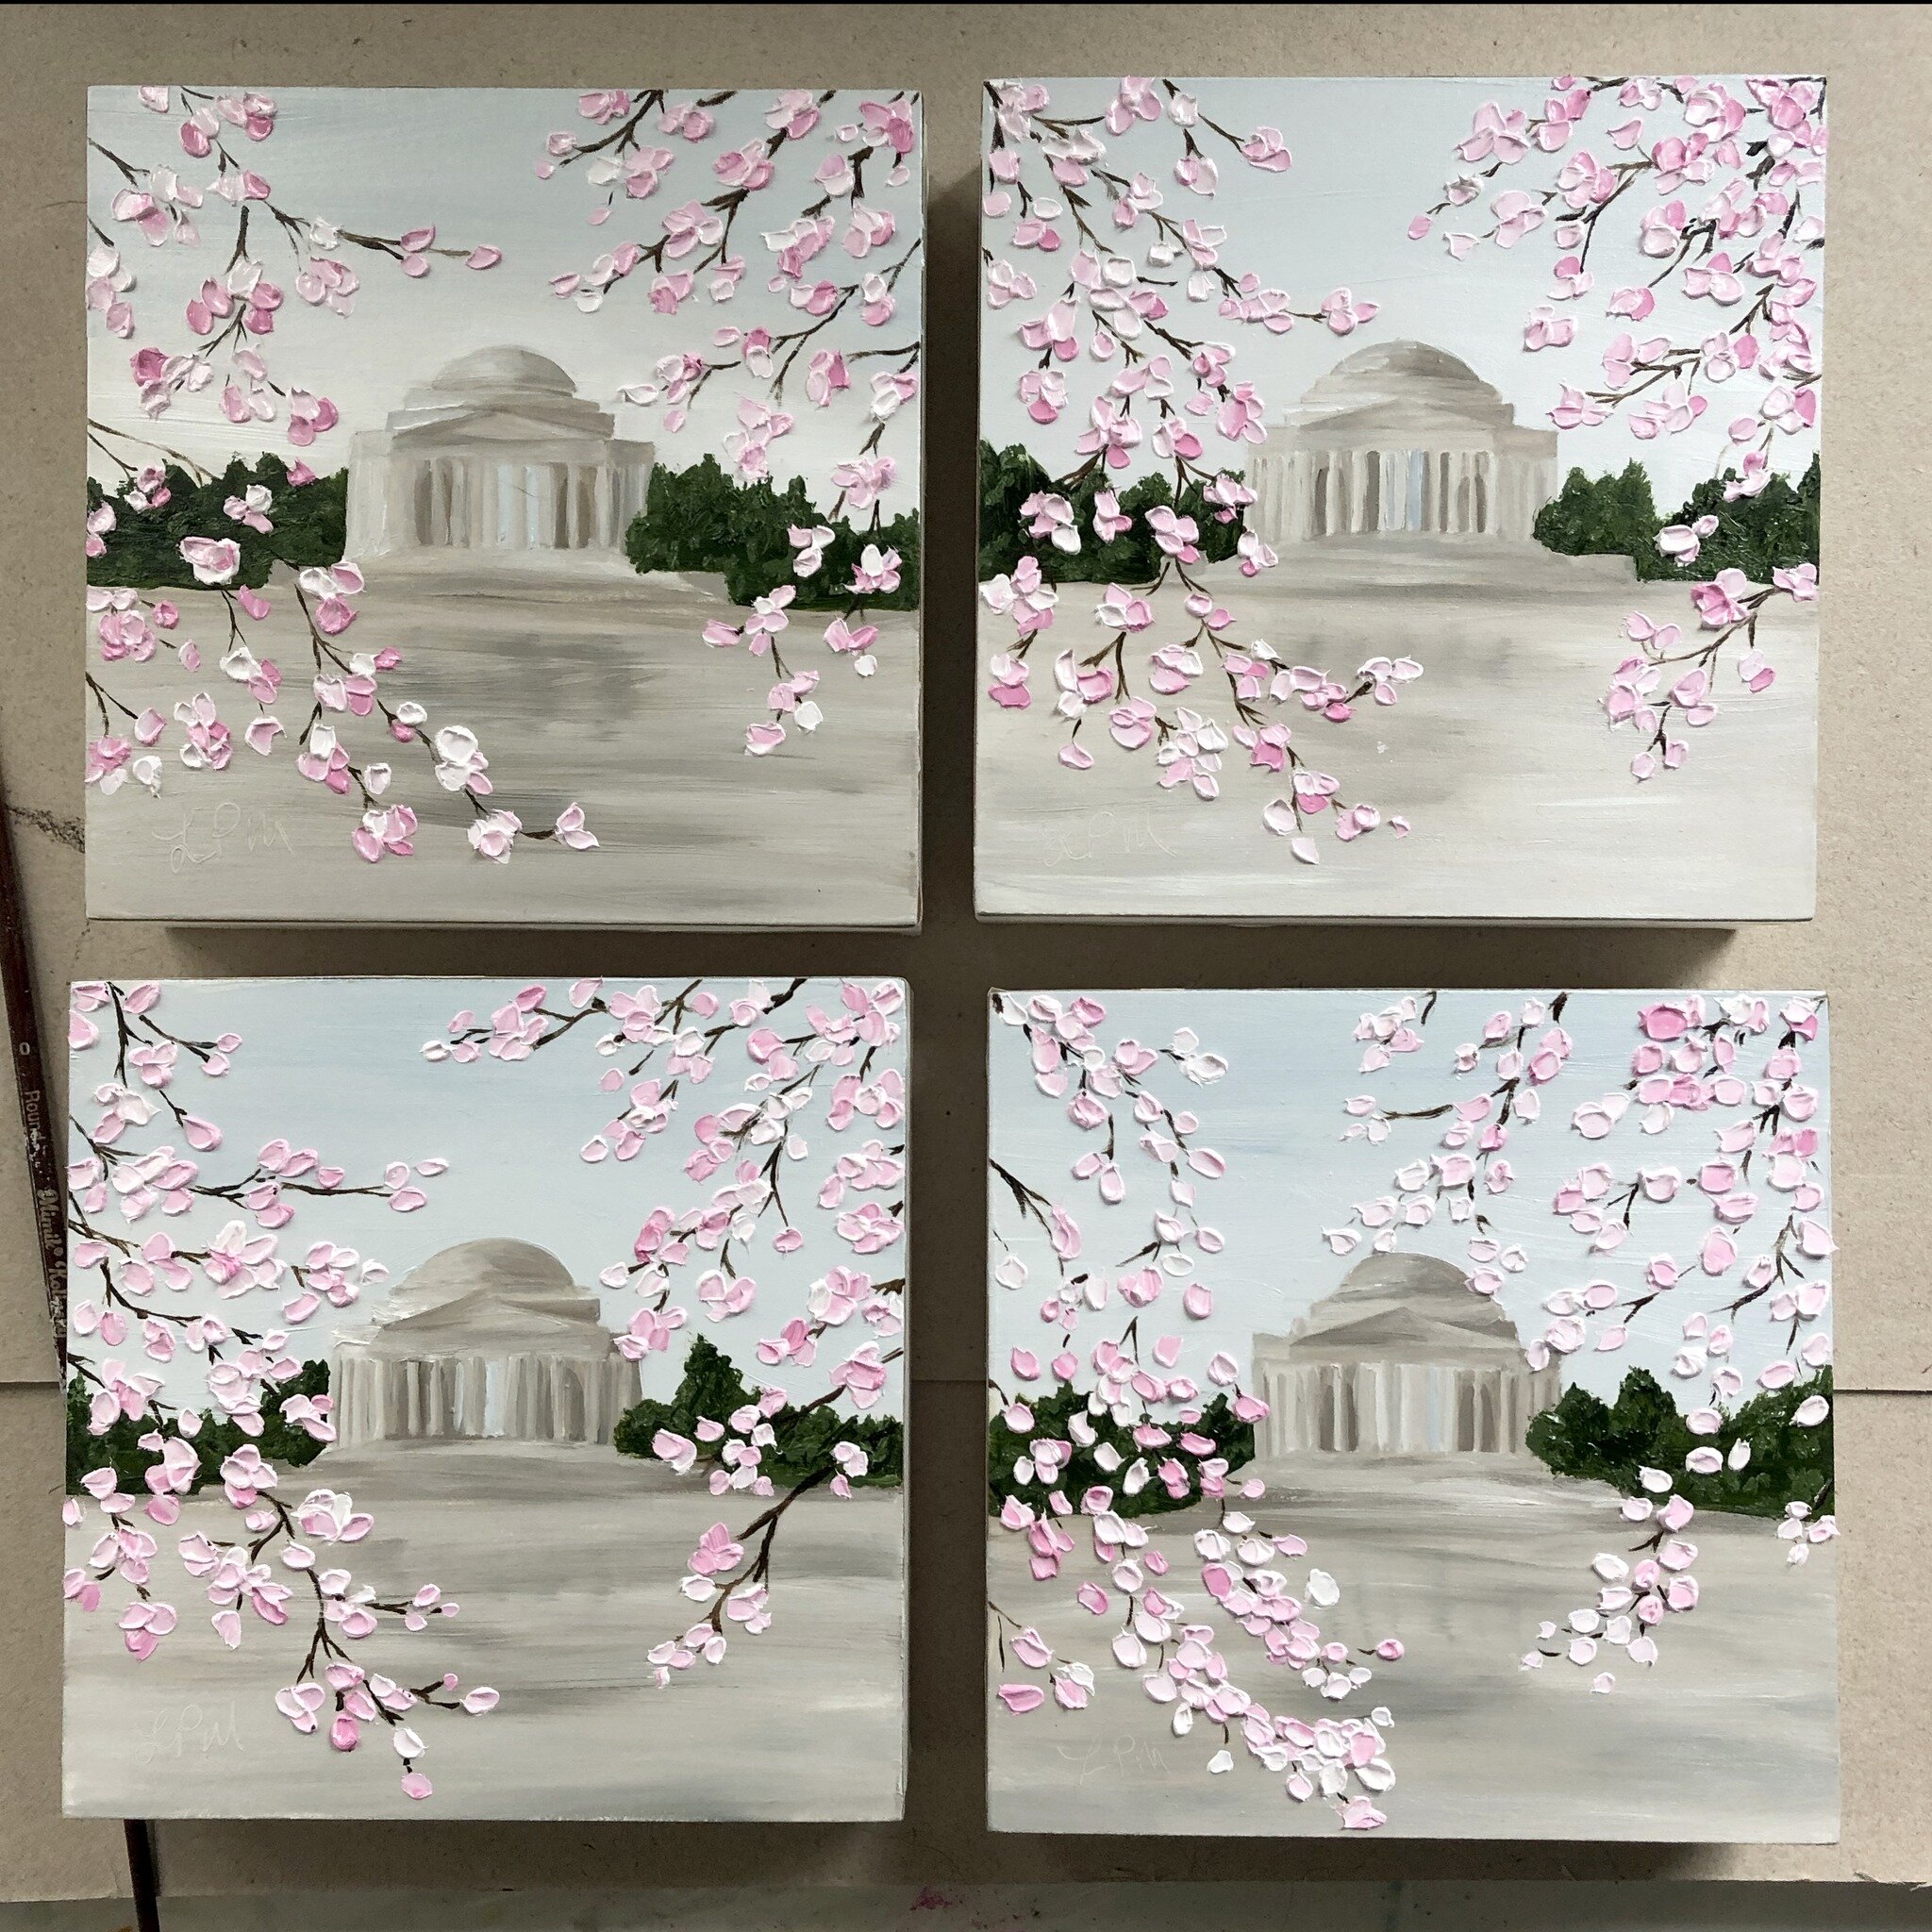 This has been a week of dry government report work and I was feeling the need for a little creativity. Felt great to pick up a brush and finish these up.

Done with DC and cherry blossoms; moving on to hydrangeas, peonies, and still lifes next.

#oil